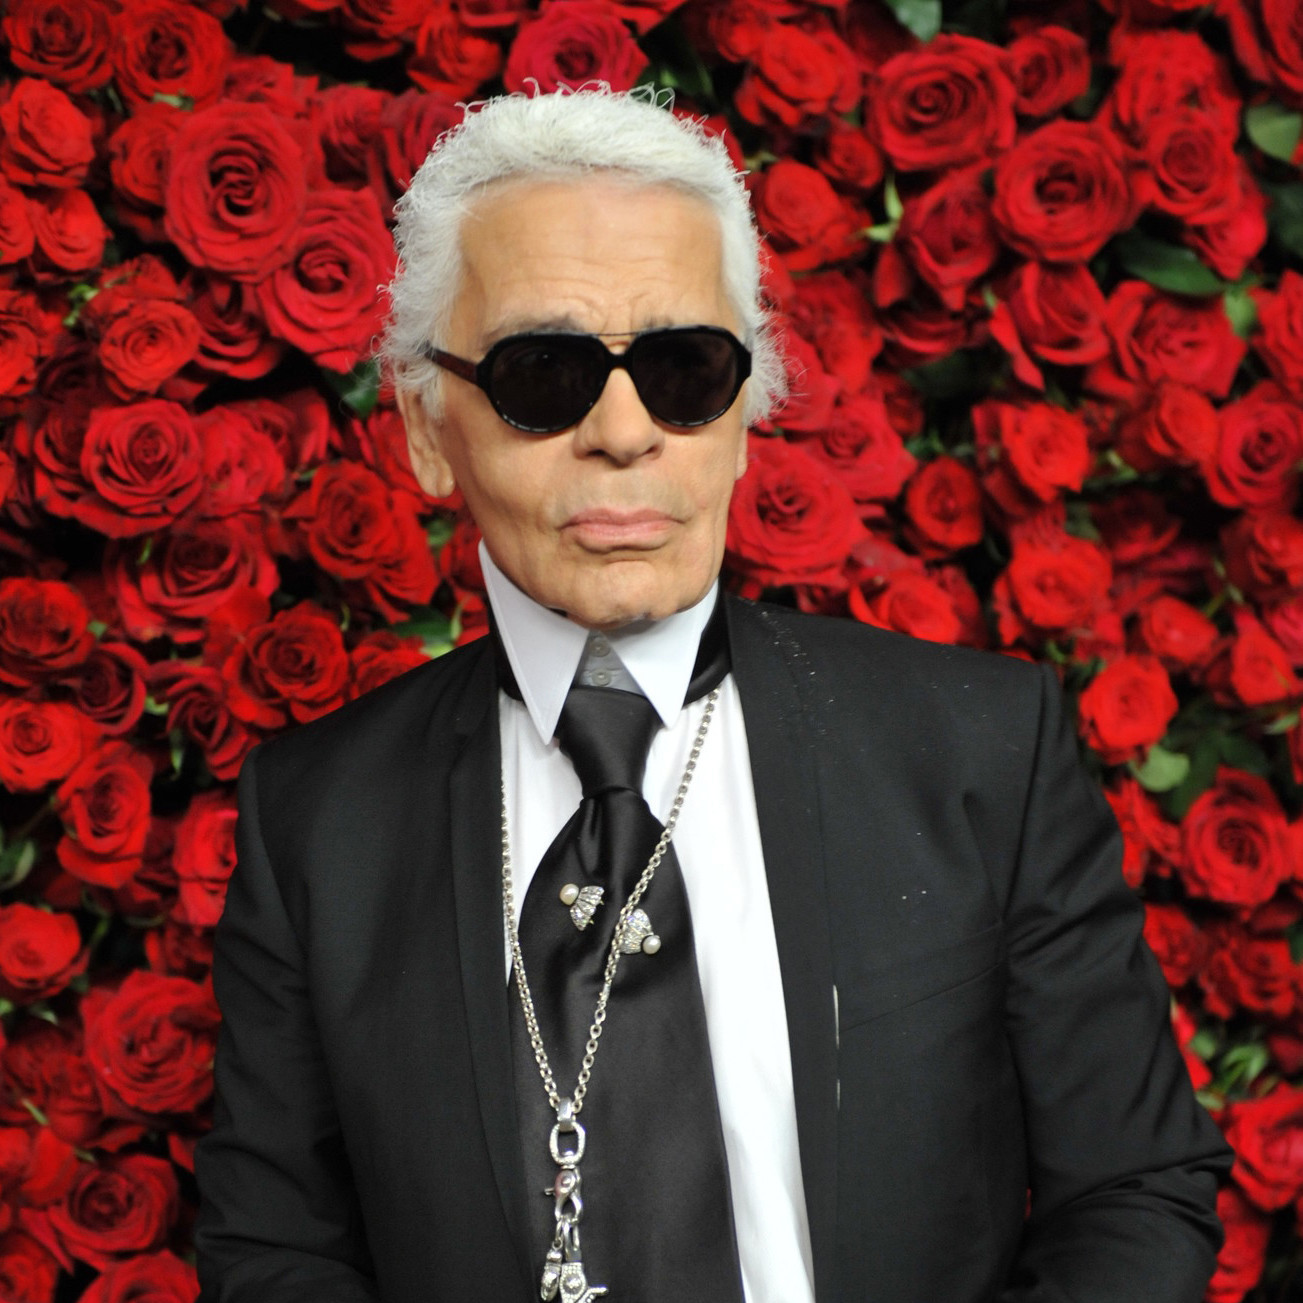 The life and career of Karl Lagerfeld - Baltimore Sun